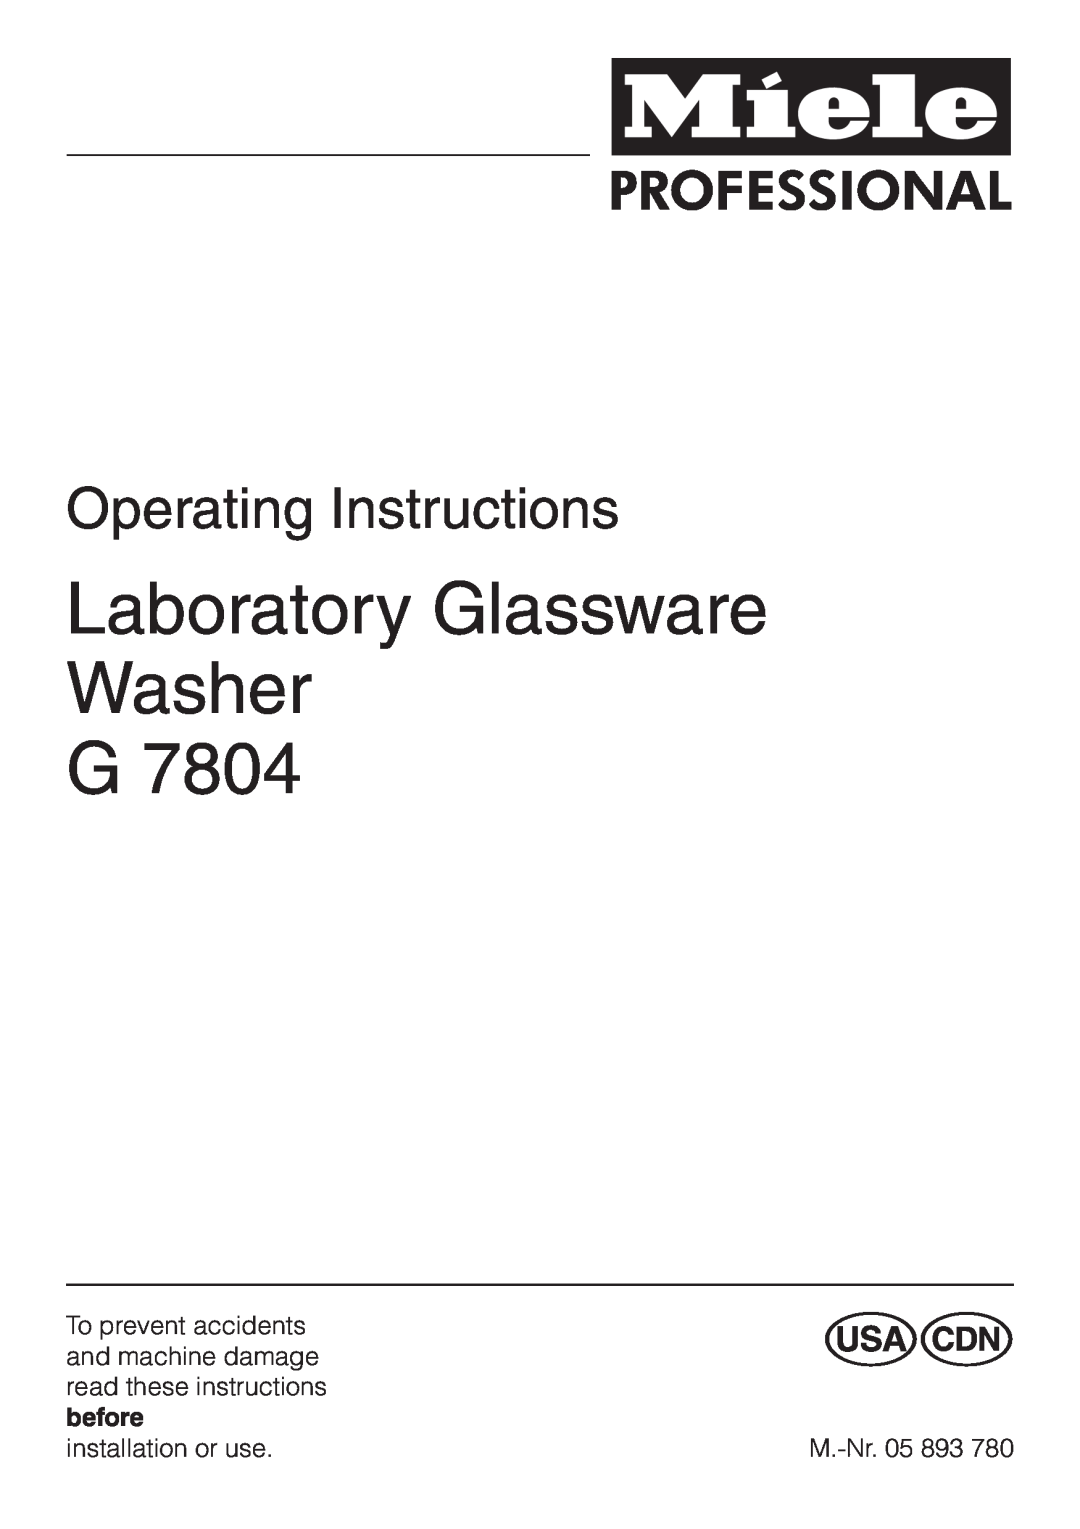 Miele G 7804 operating instructions Operating Instructions, Laboratory Glassware Washer G 